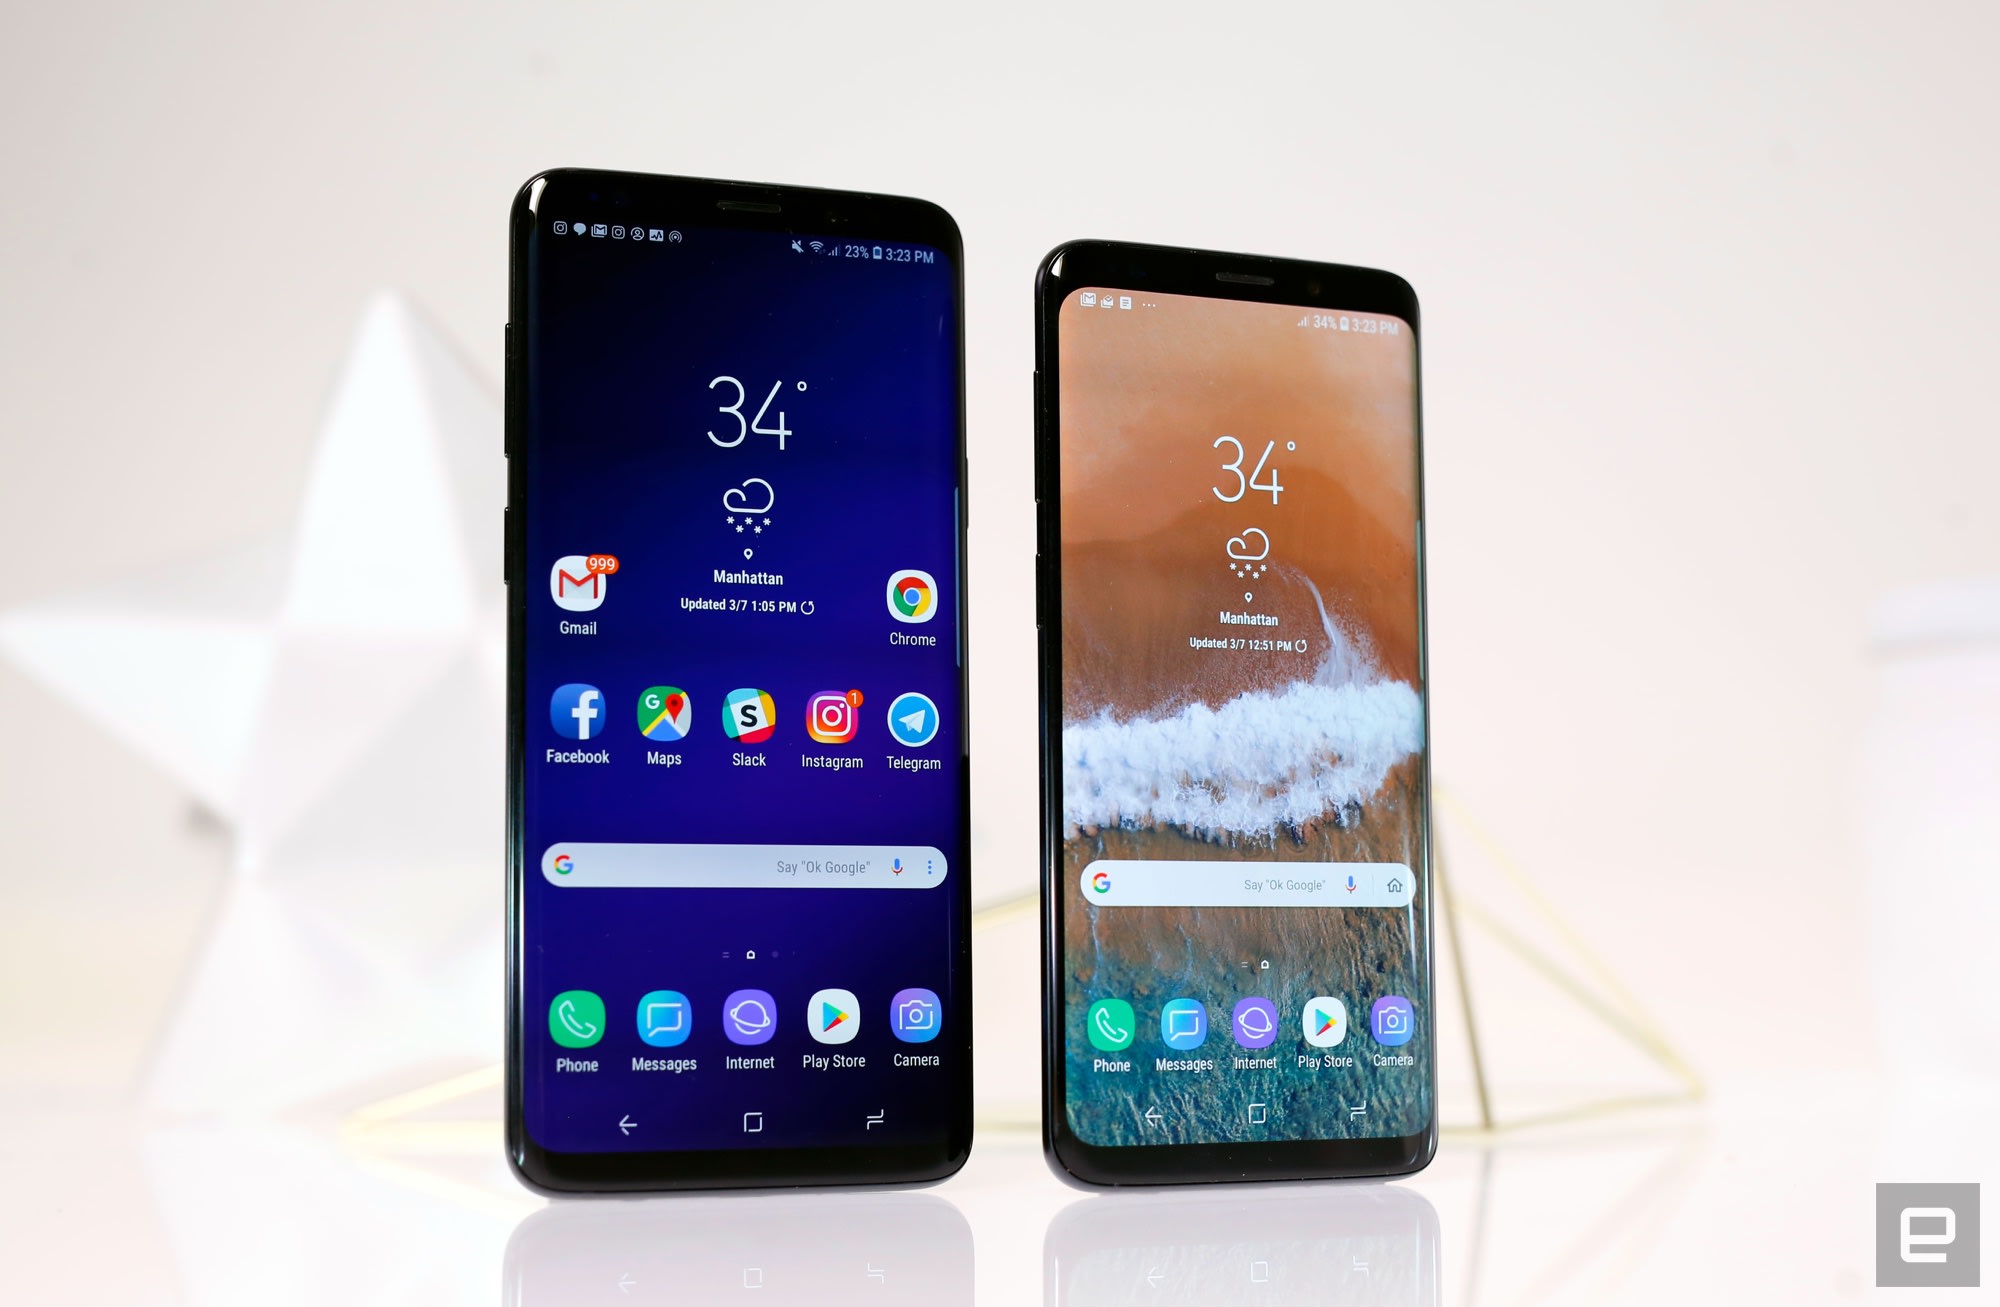 Samsung Galaxy S9 and S9 Plus review: Excellent, not monumental